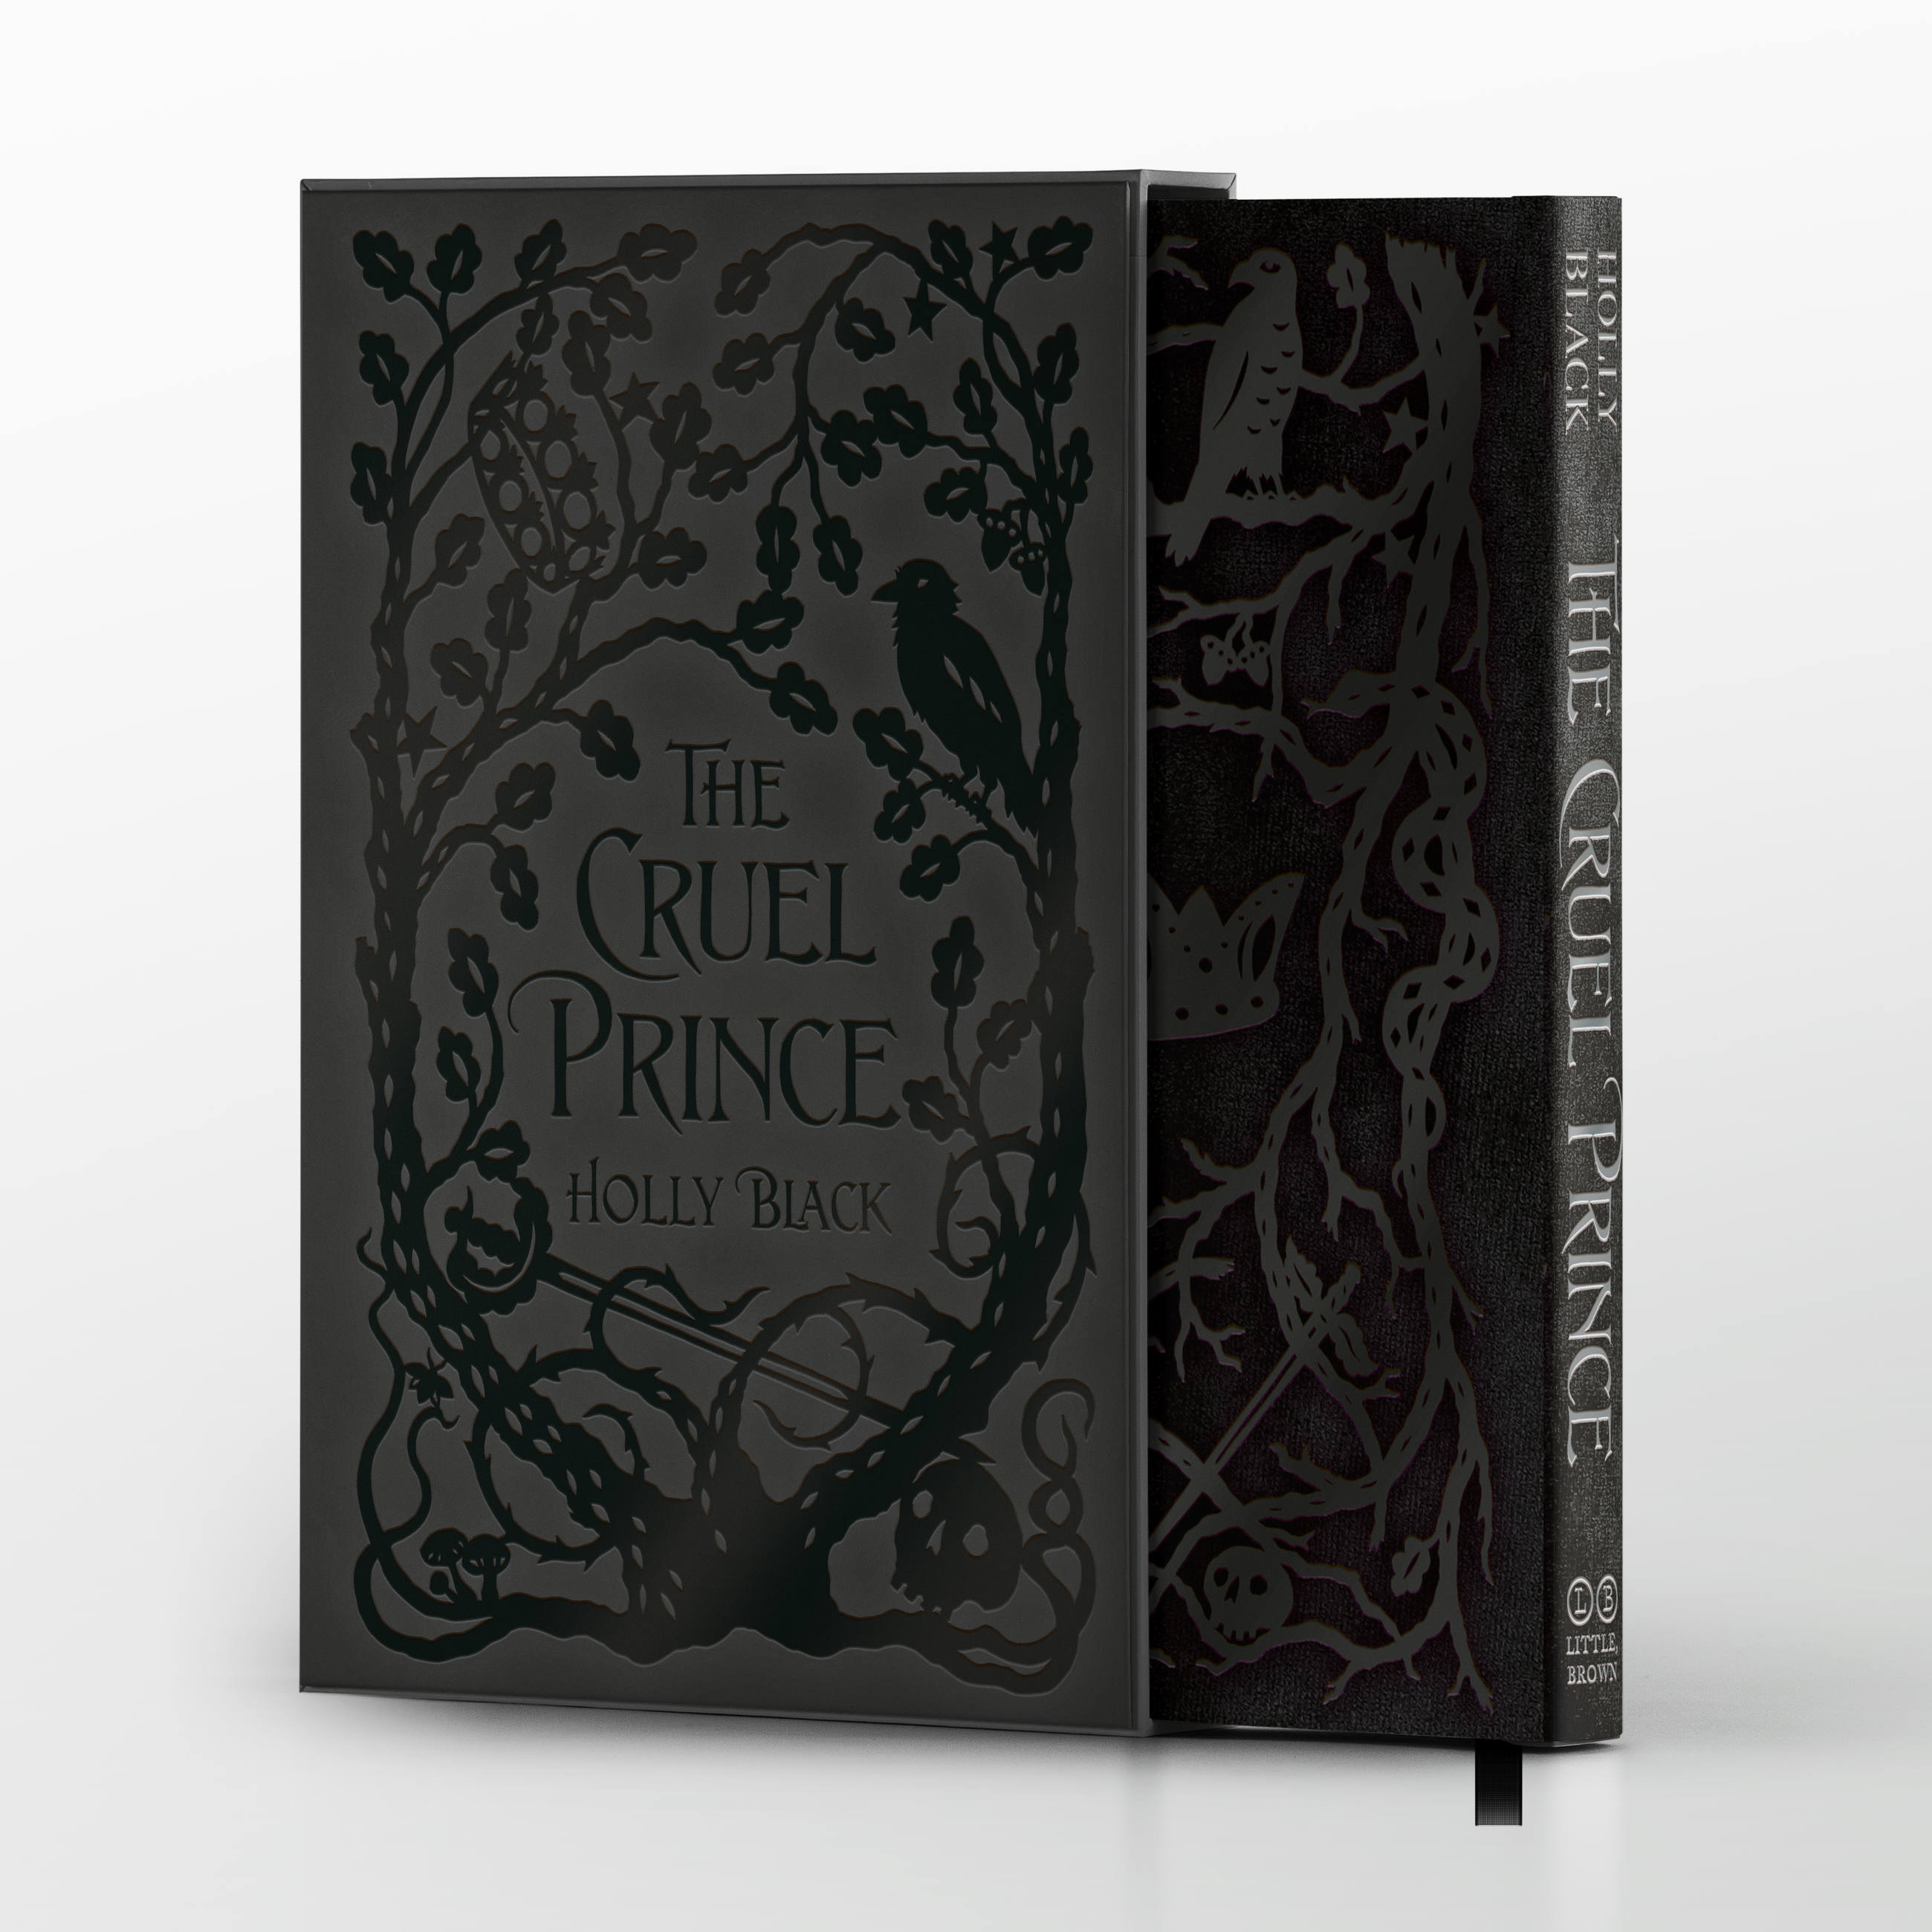 Book　Prince:　The　Hachette　Group　Cruel　by　Holly　Collector's　Edition　Black